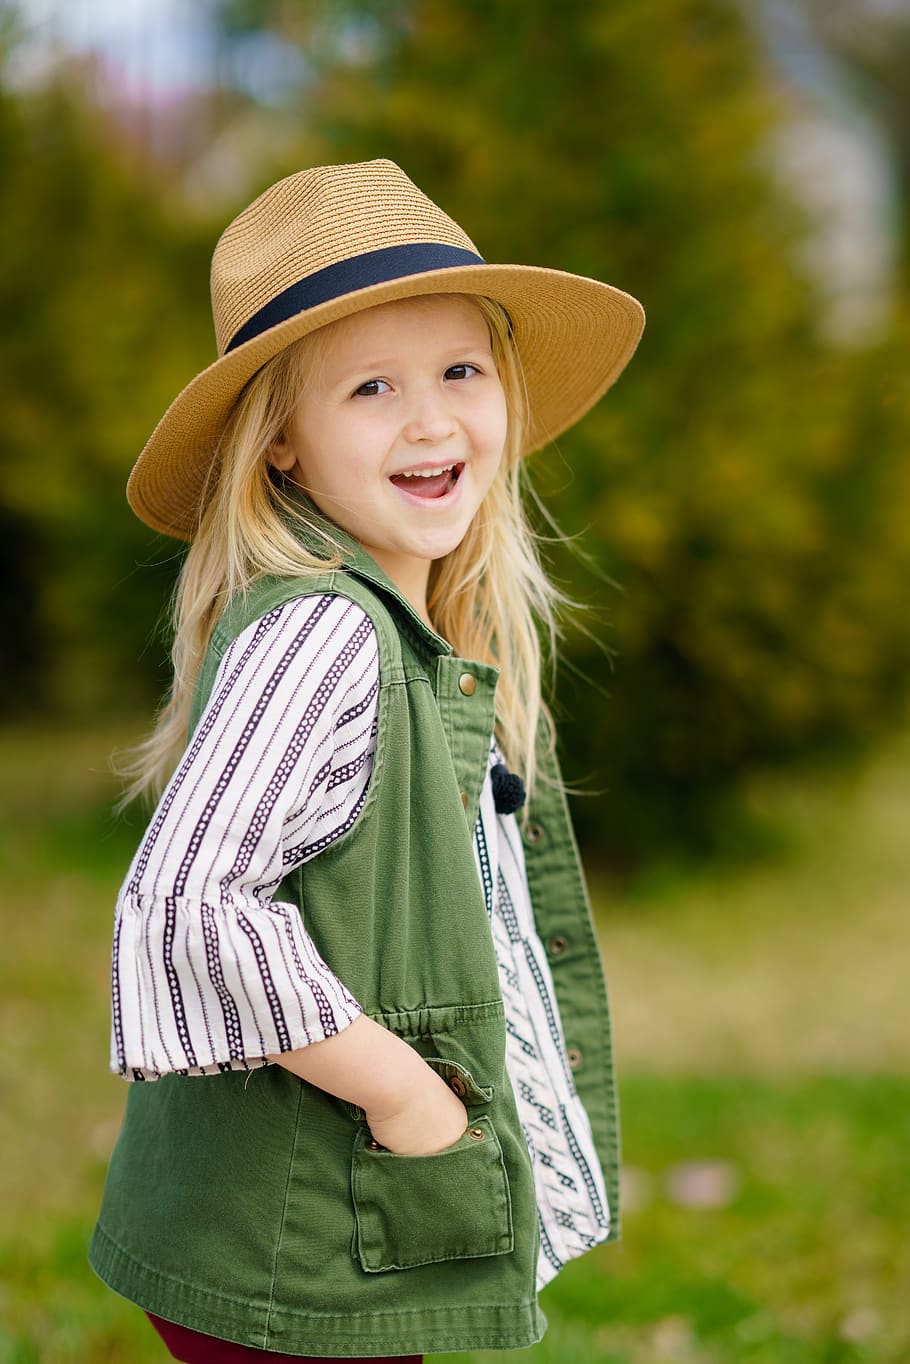 selective focus photography of girl smiling wearing sun hat, apparel